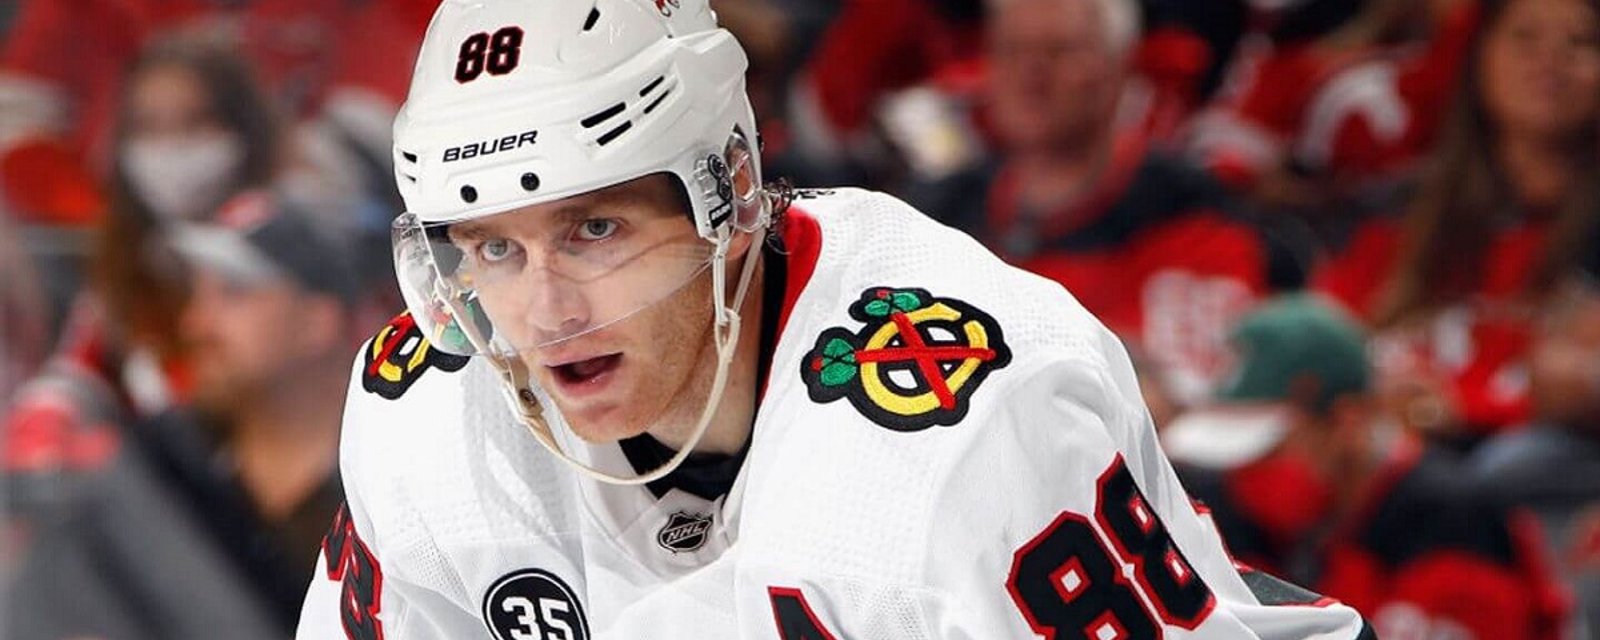 Rumor: Patrick Kane down to 2 teams, decision expected shortly.